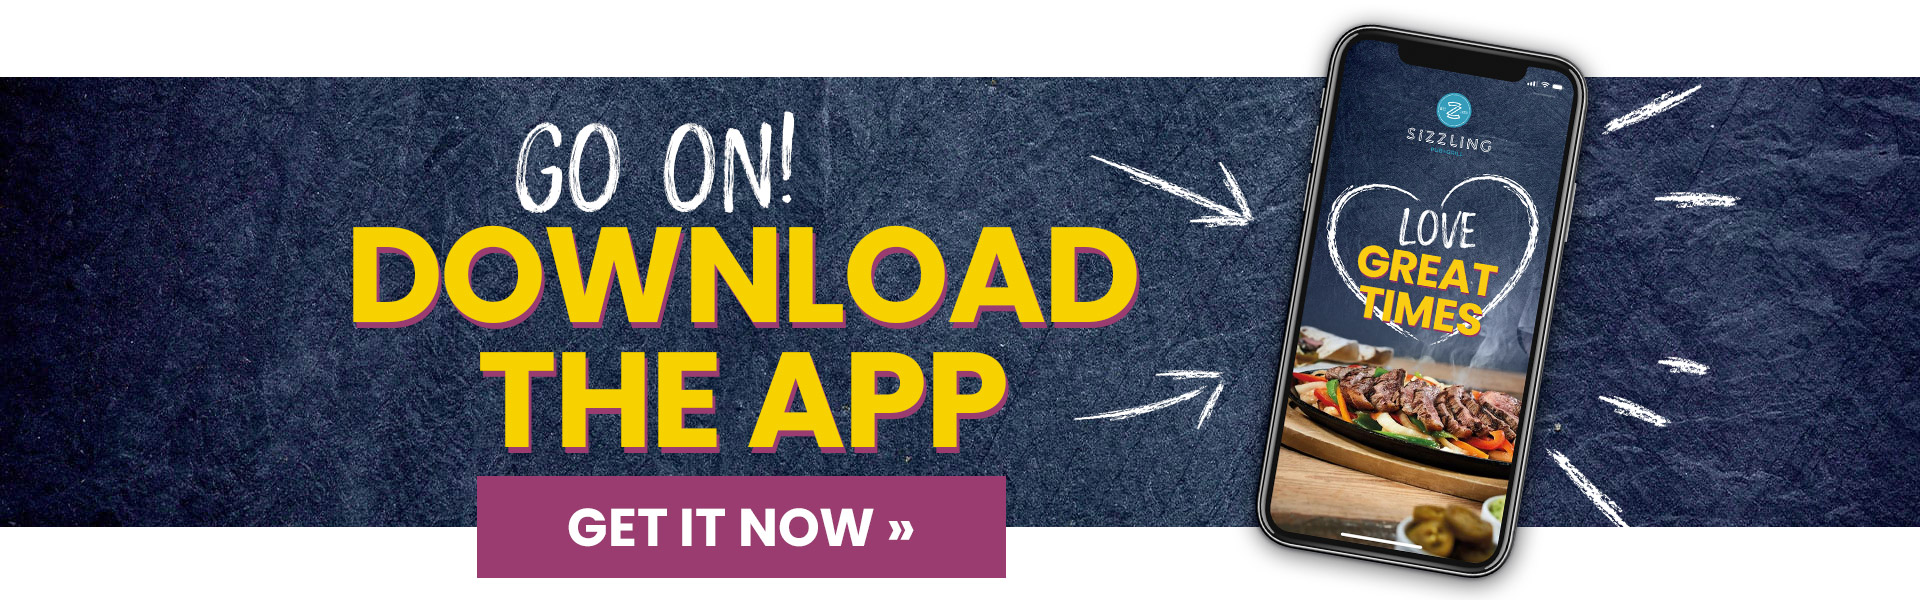 Download the App at Hare and Hounds, Birmingham